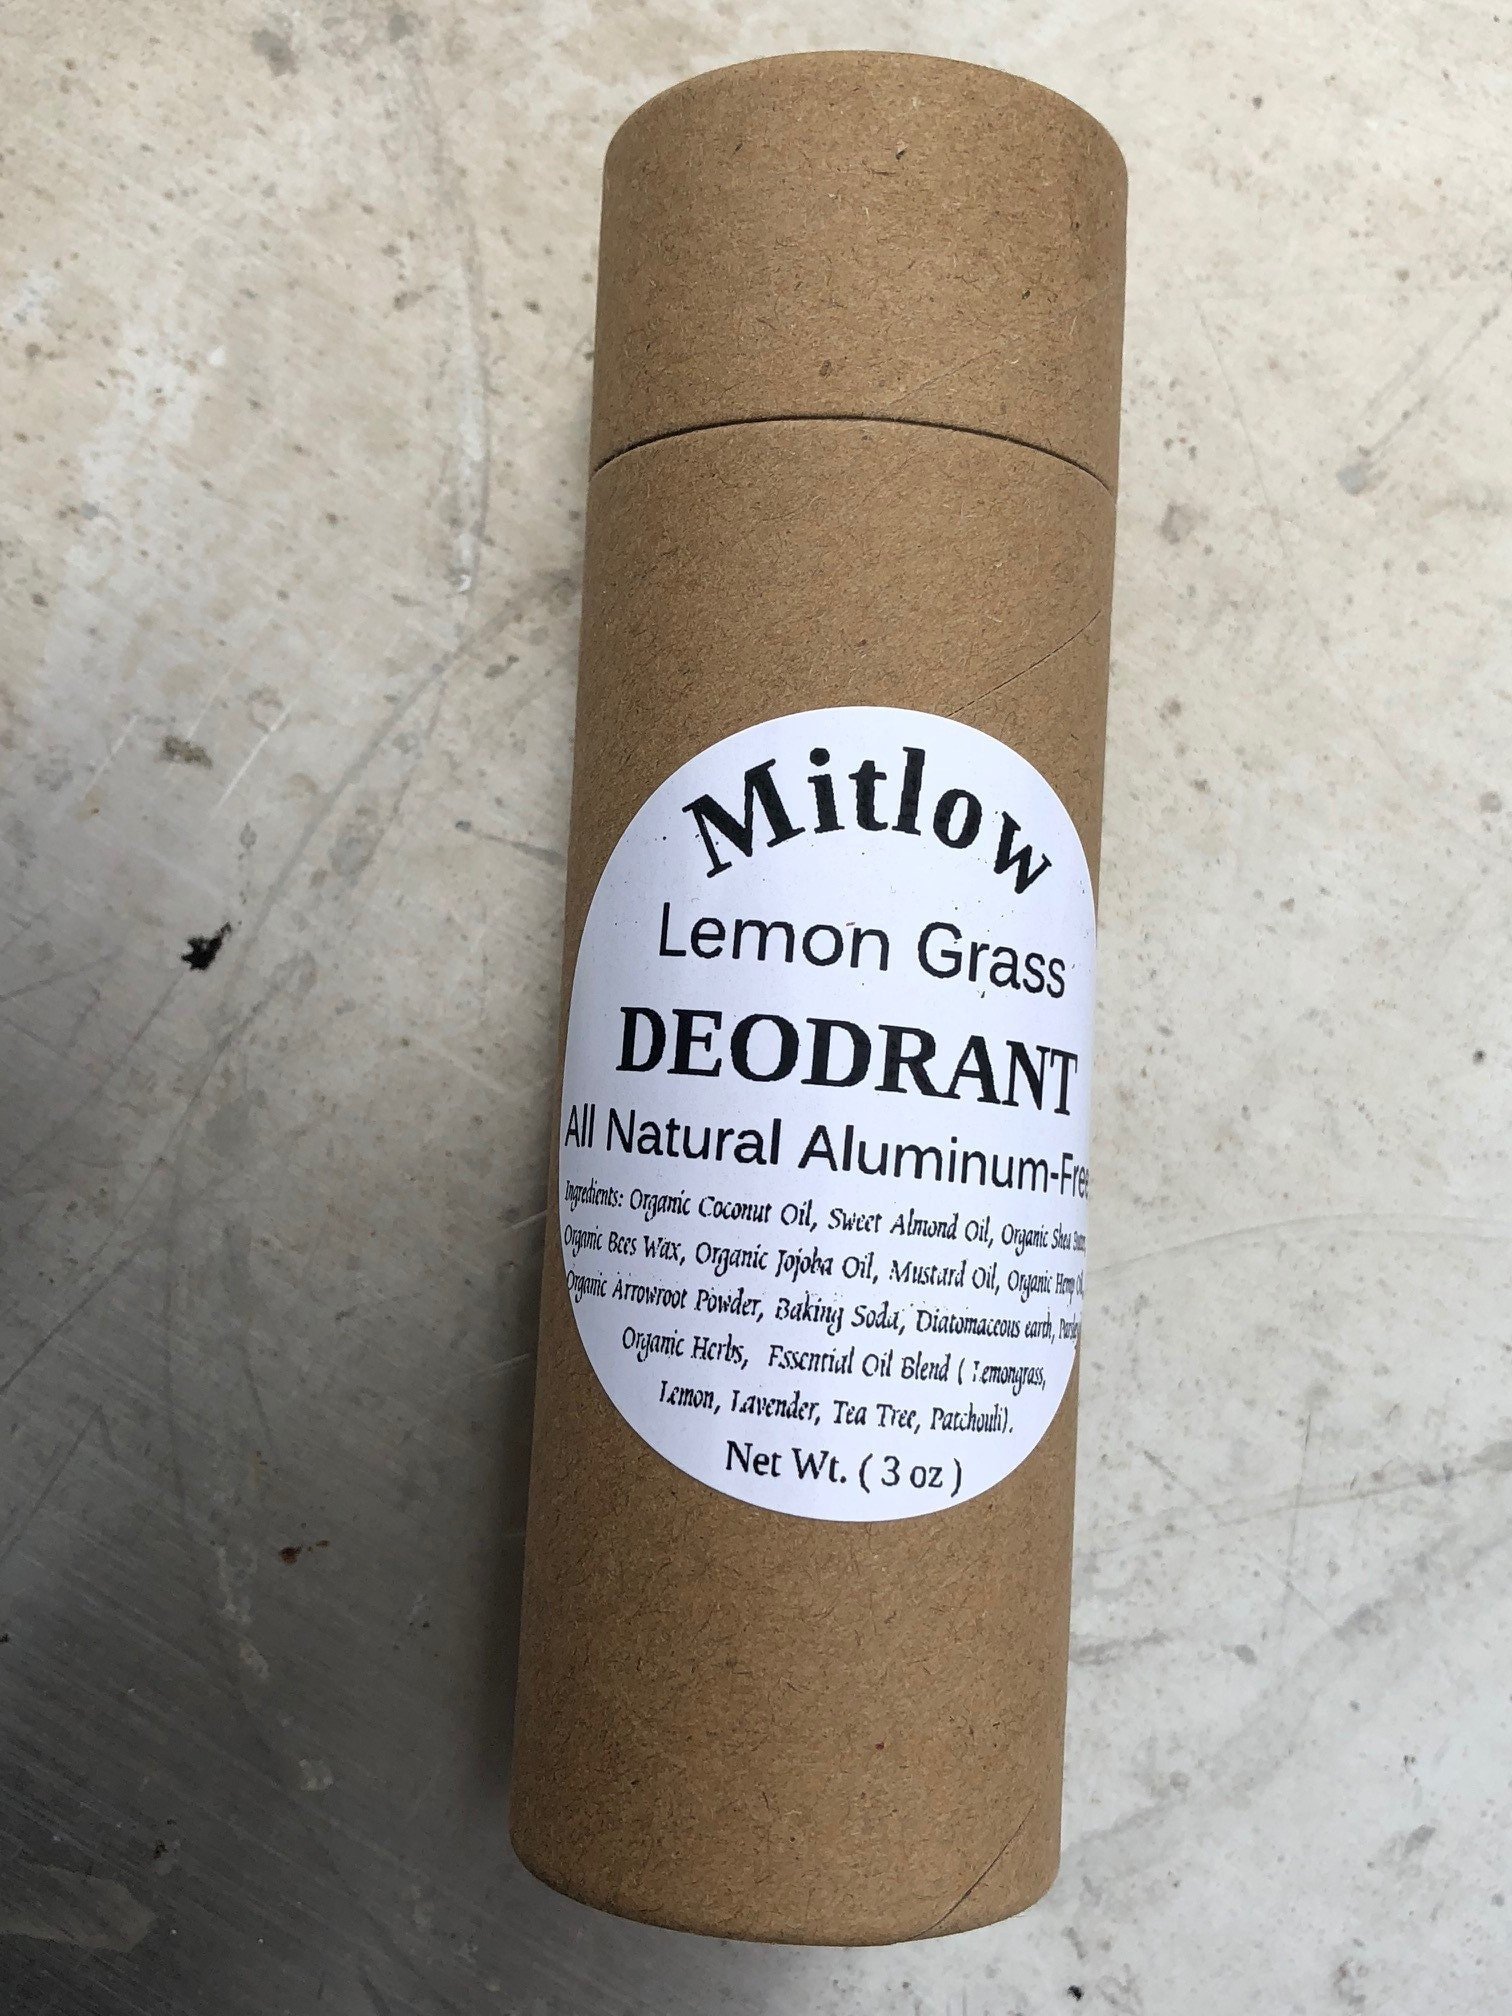 Mitlow Eczema Deodorant that stops itching and odor ...